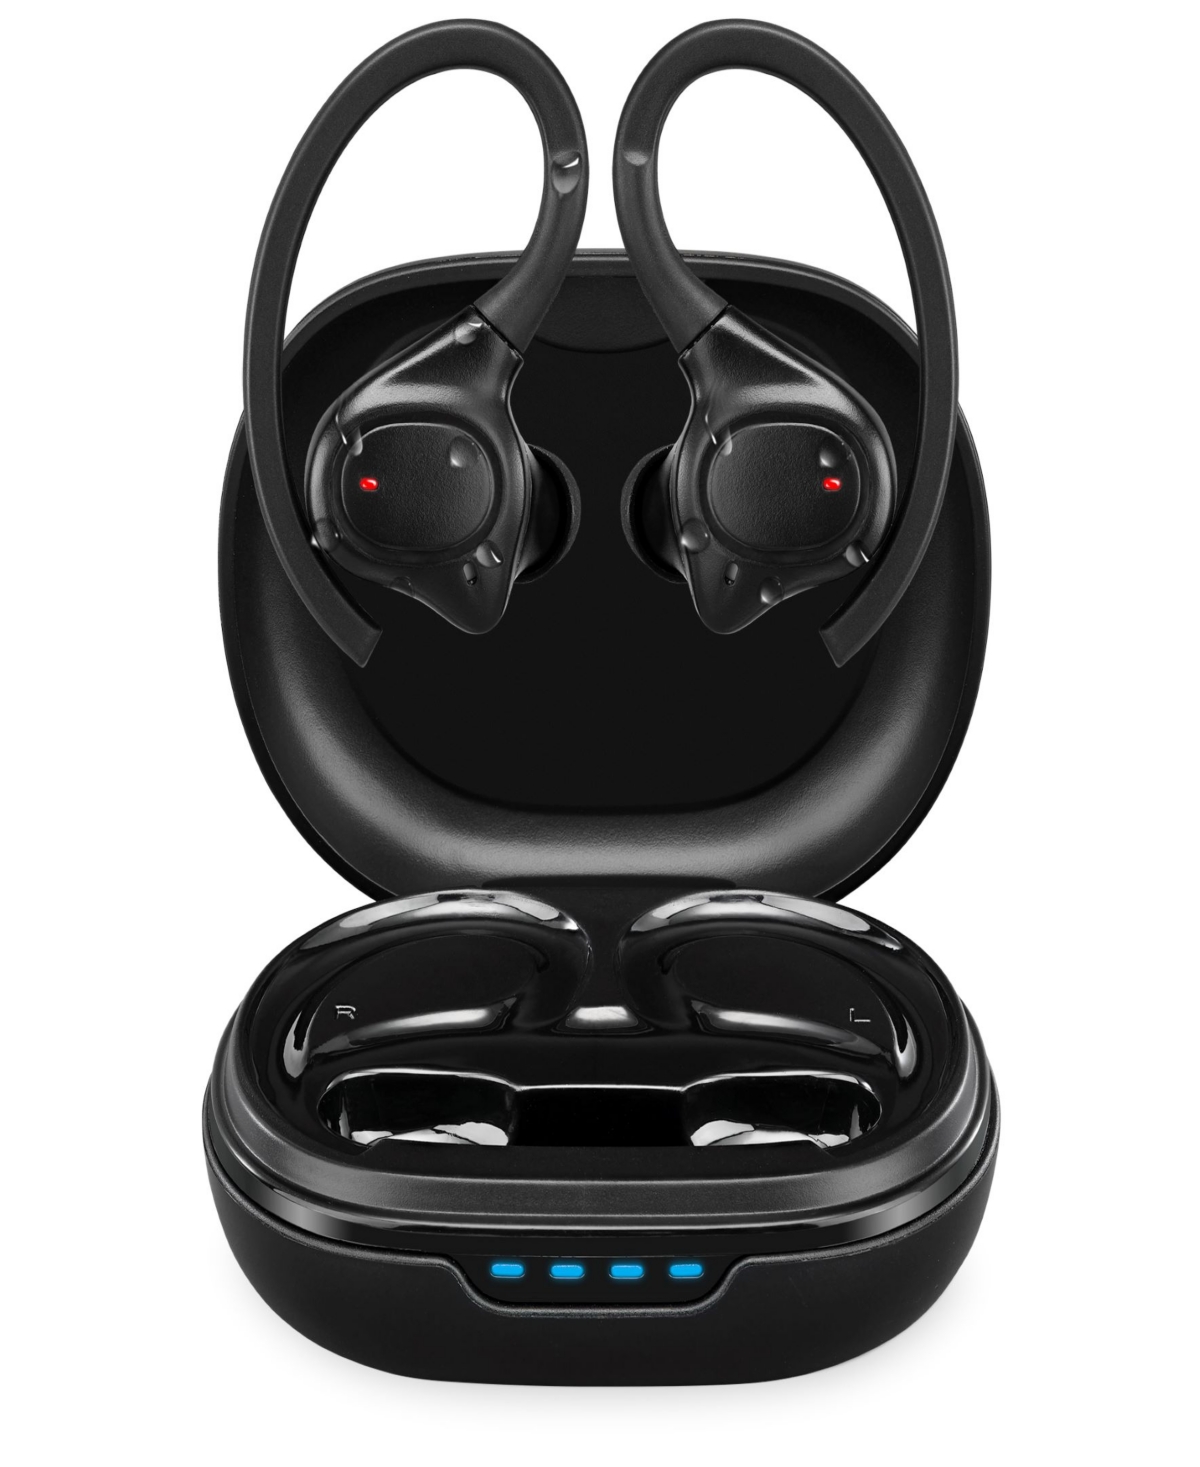 Ilive Water-resistant Truly Wireless Earbuds, Iaebtw53b In Black